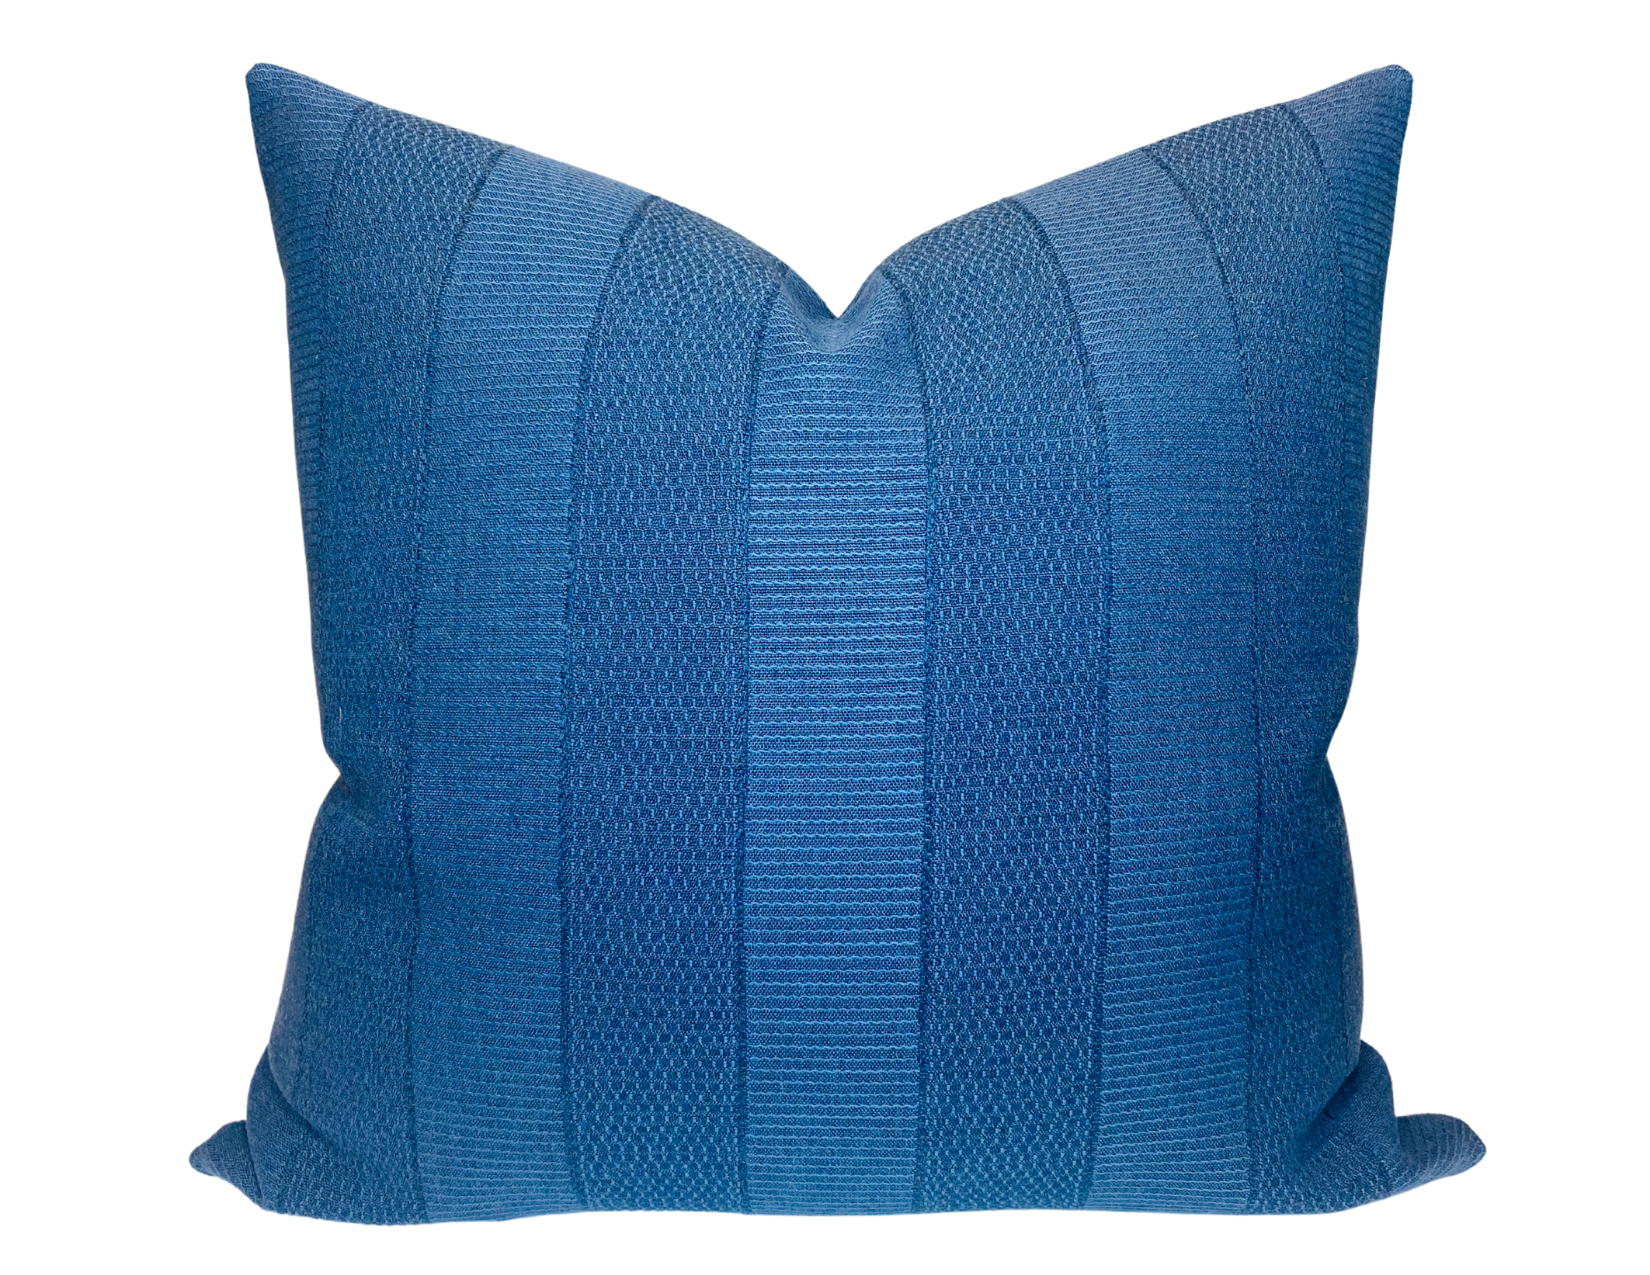 Discount Peter Dunham Asilah Pillow Cover in Midnight Blue today